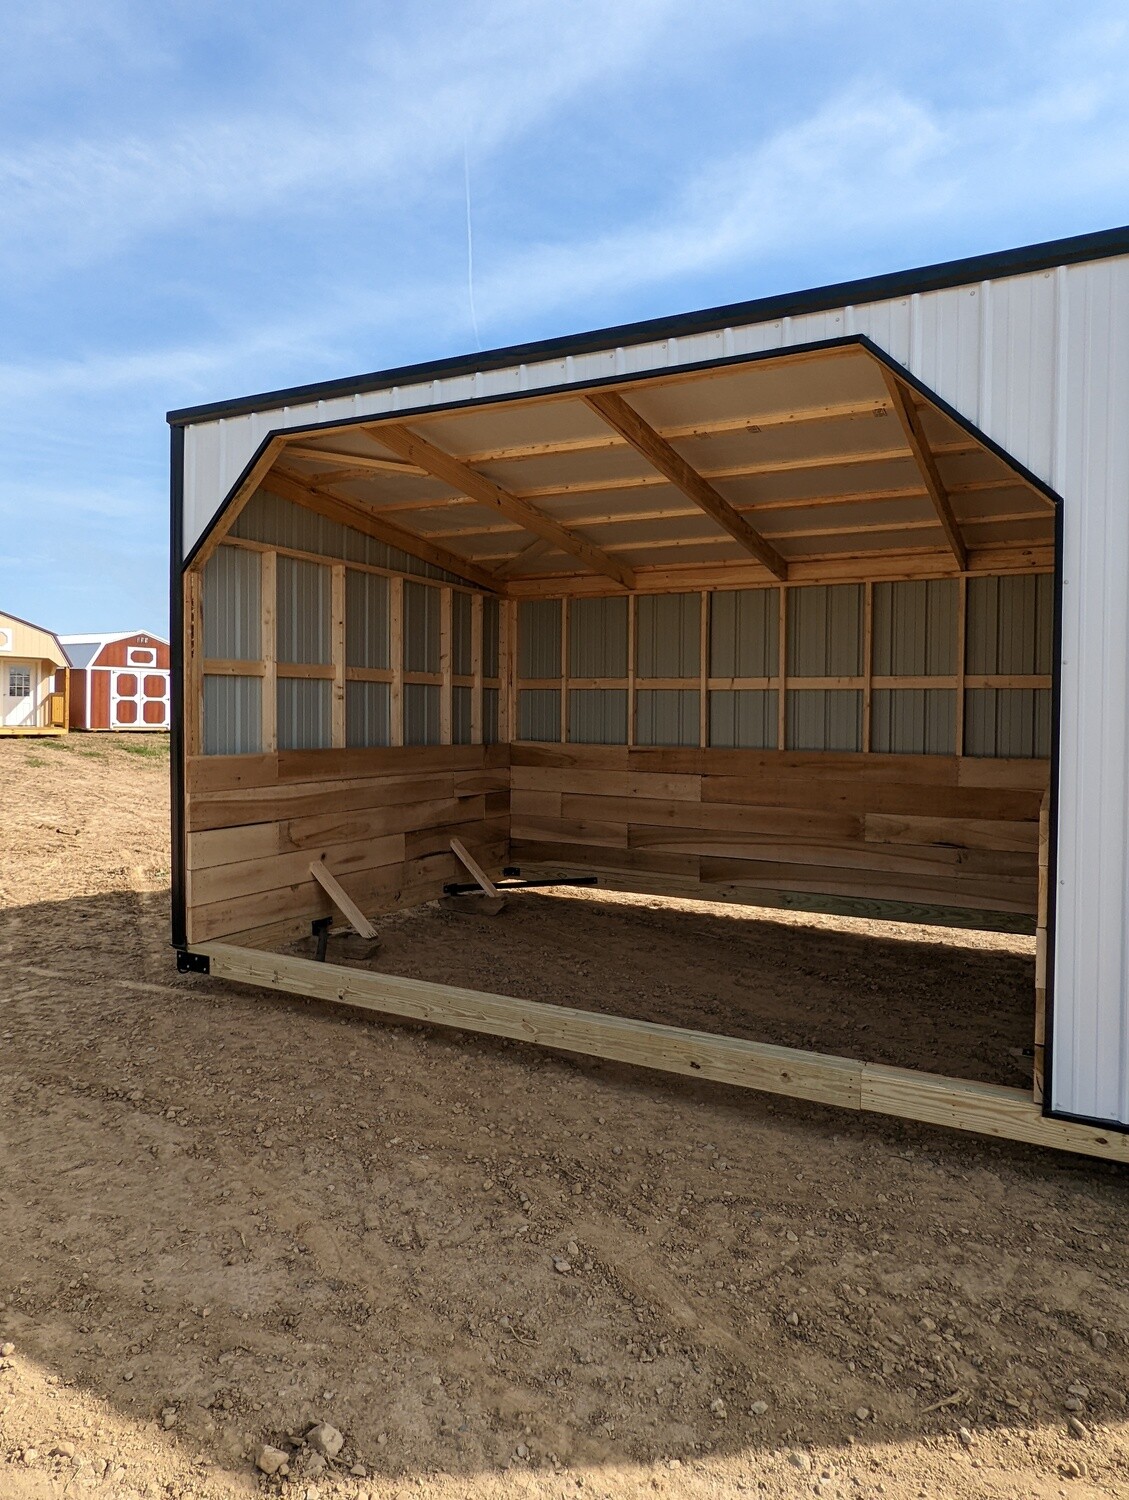 10' x 16' Horse Run-in Structures